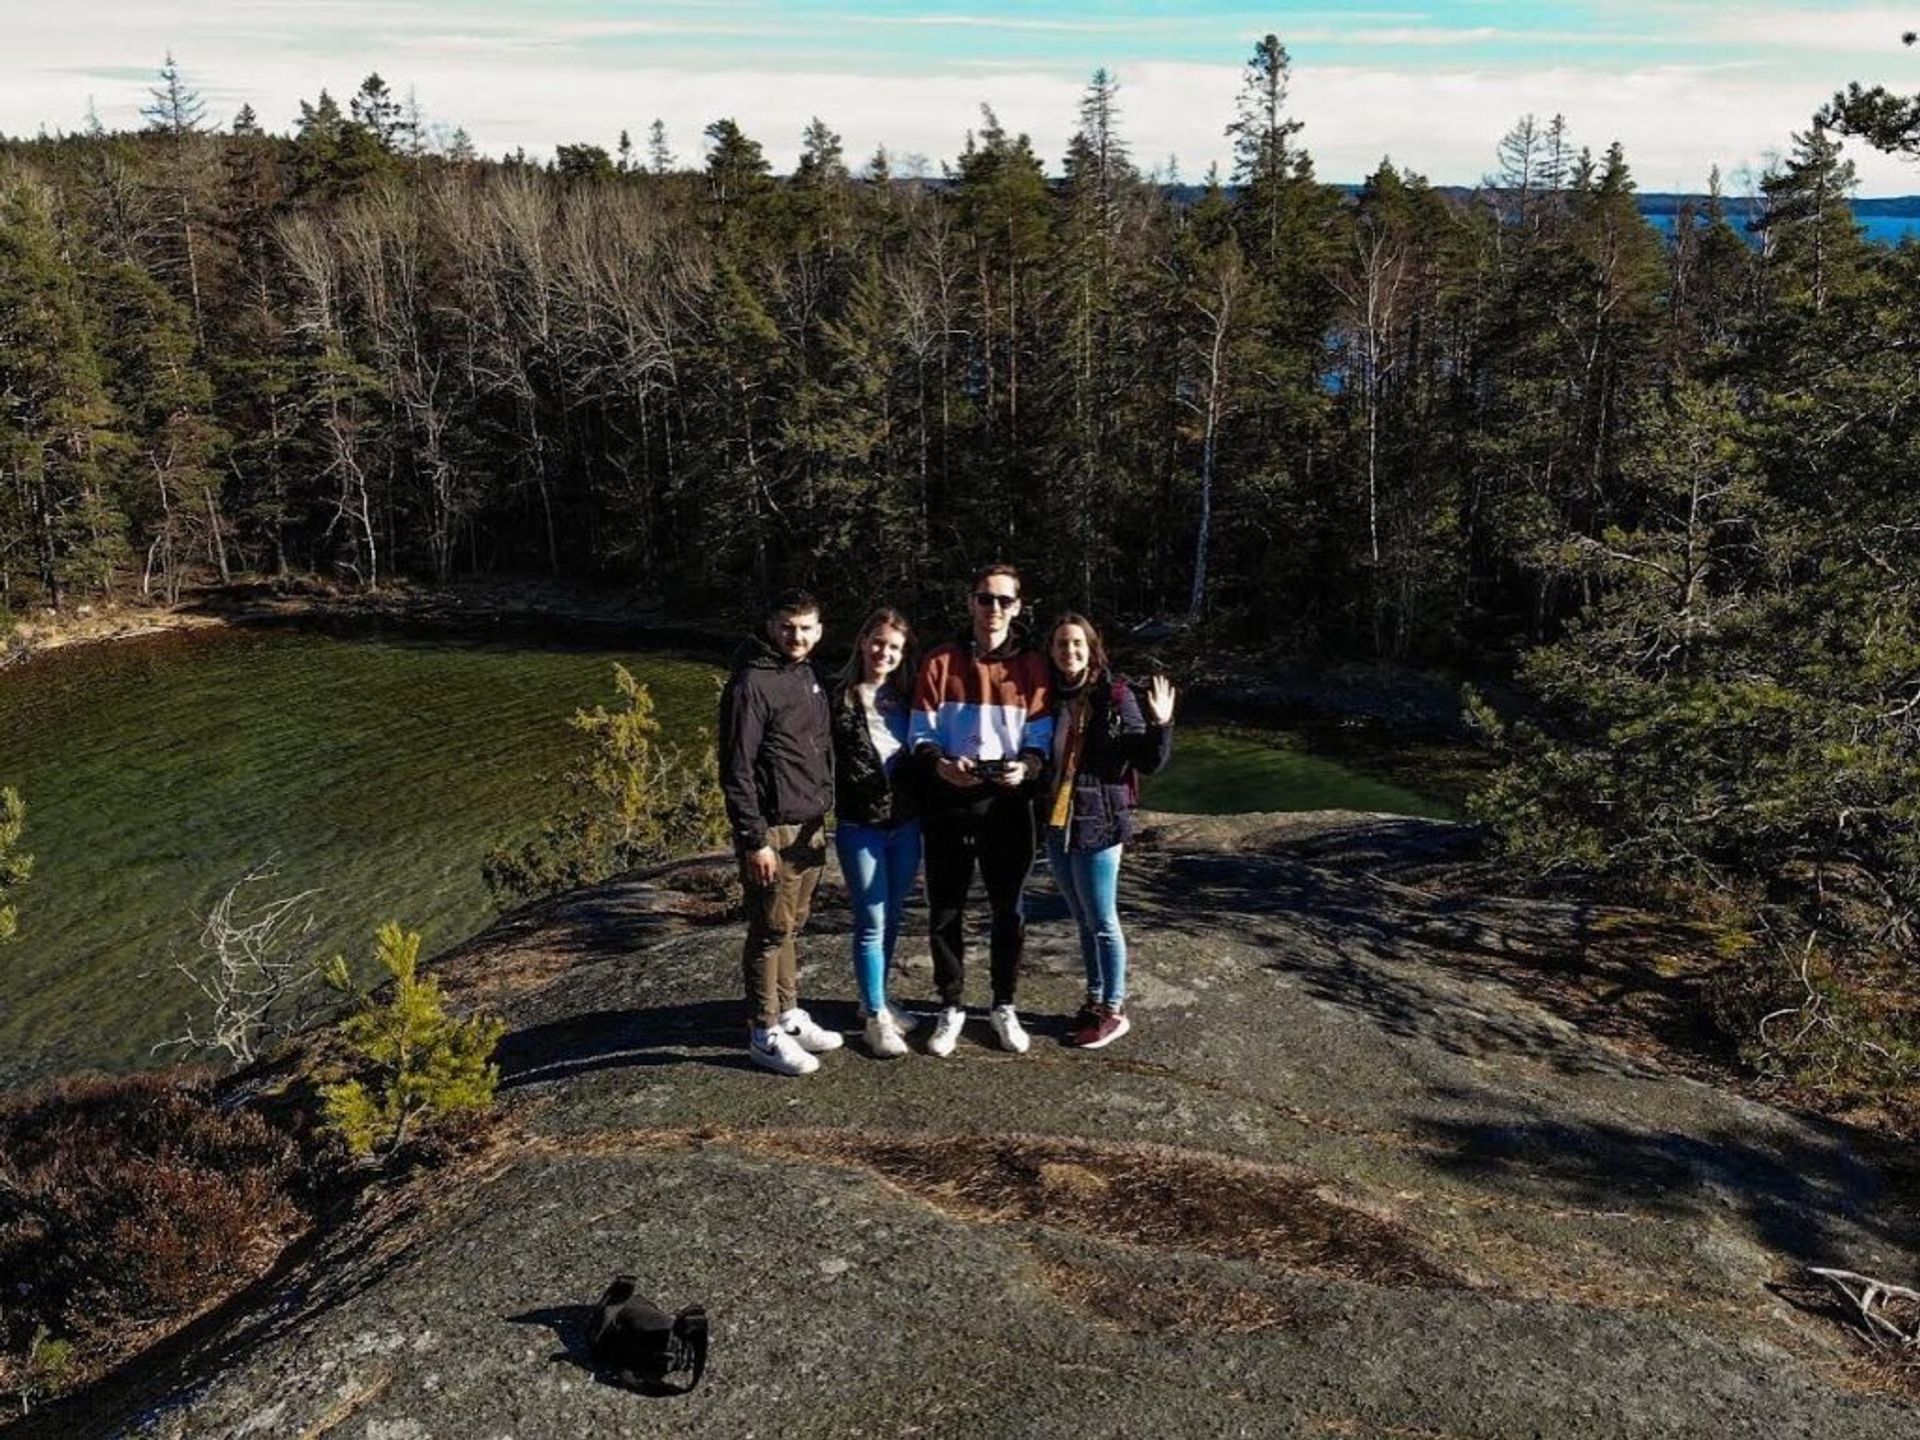 4 people taking photo by the lake.